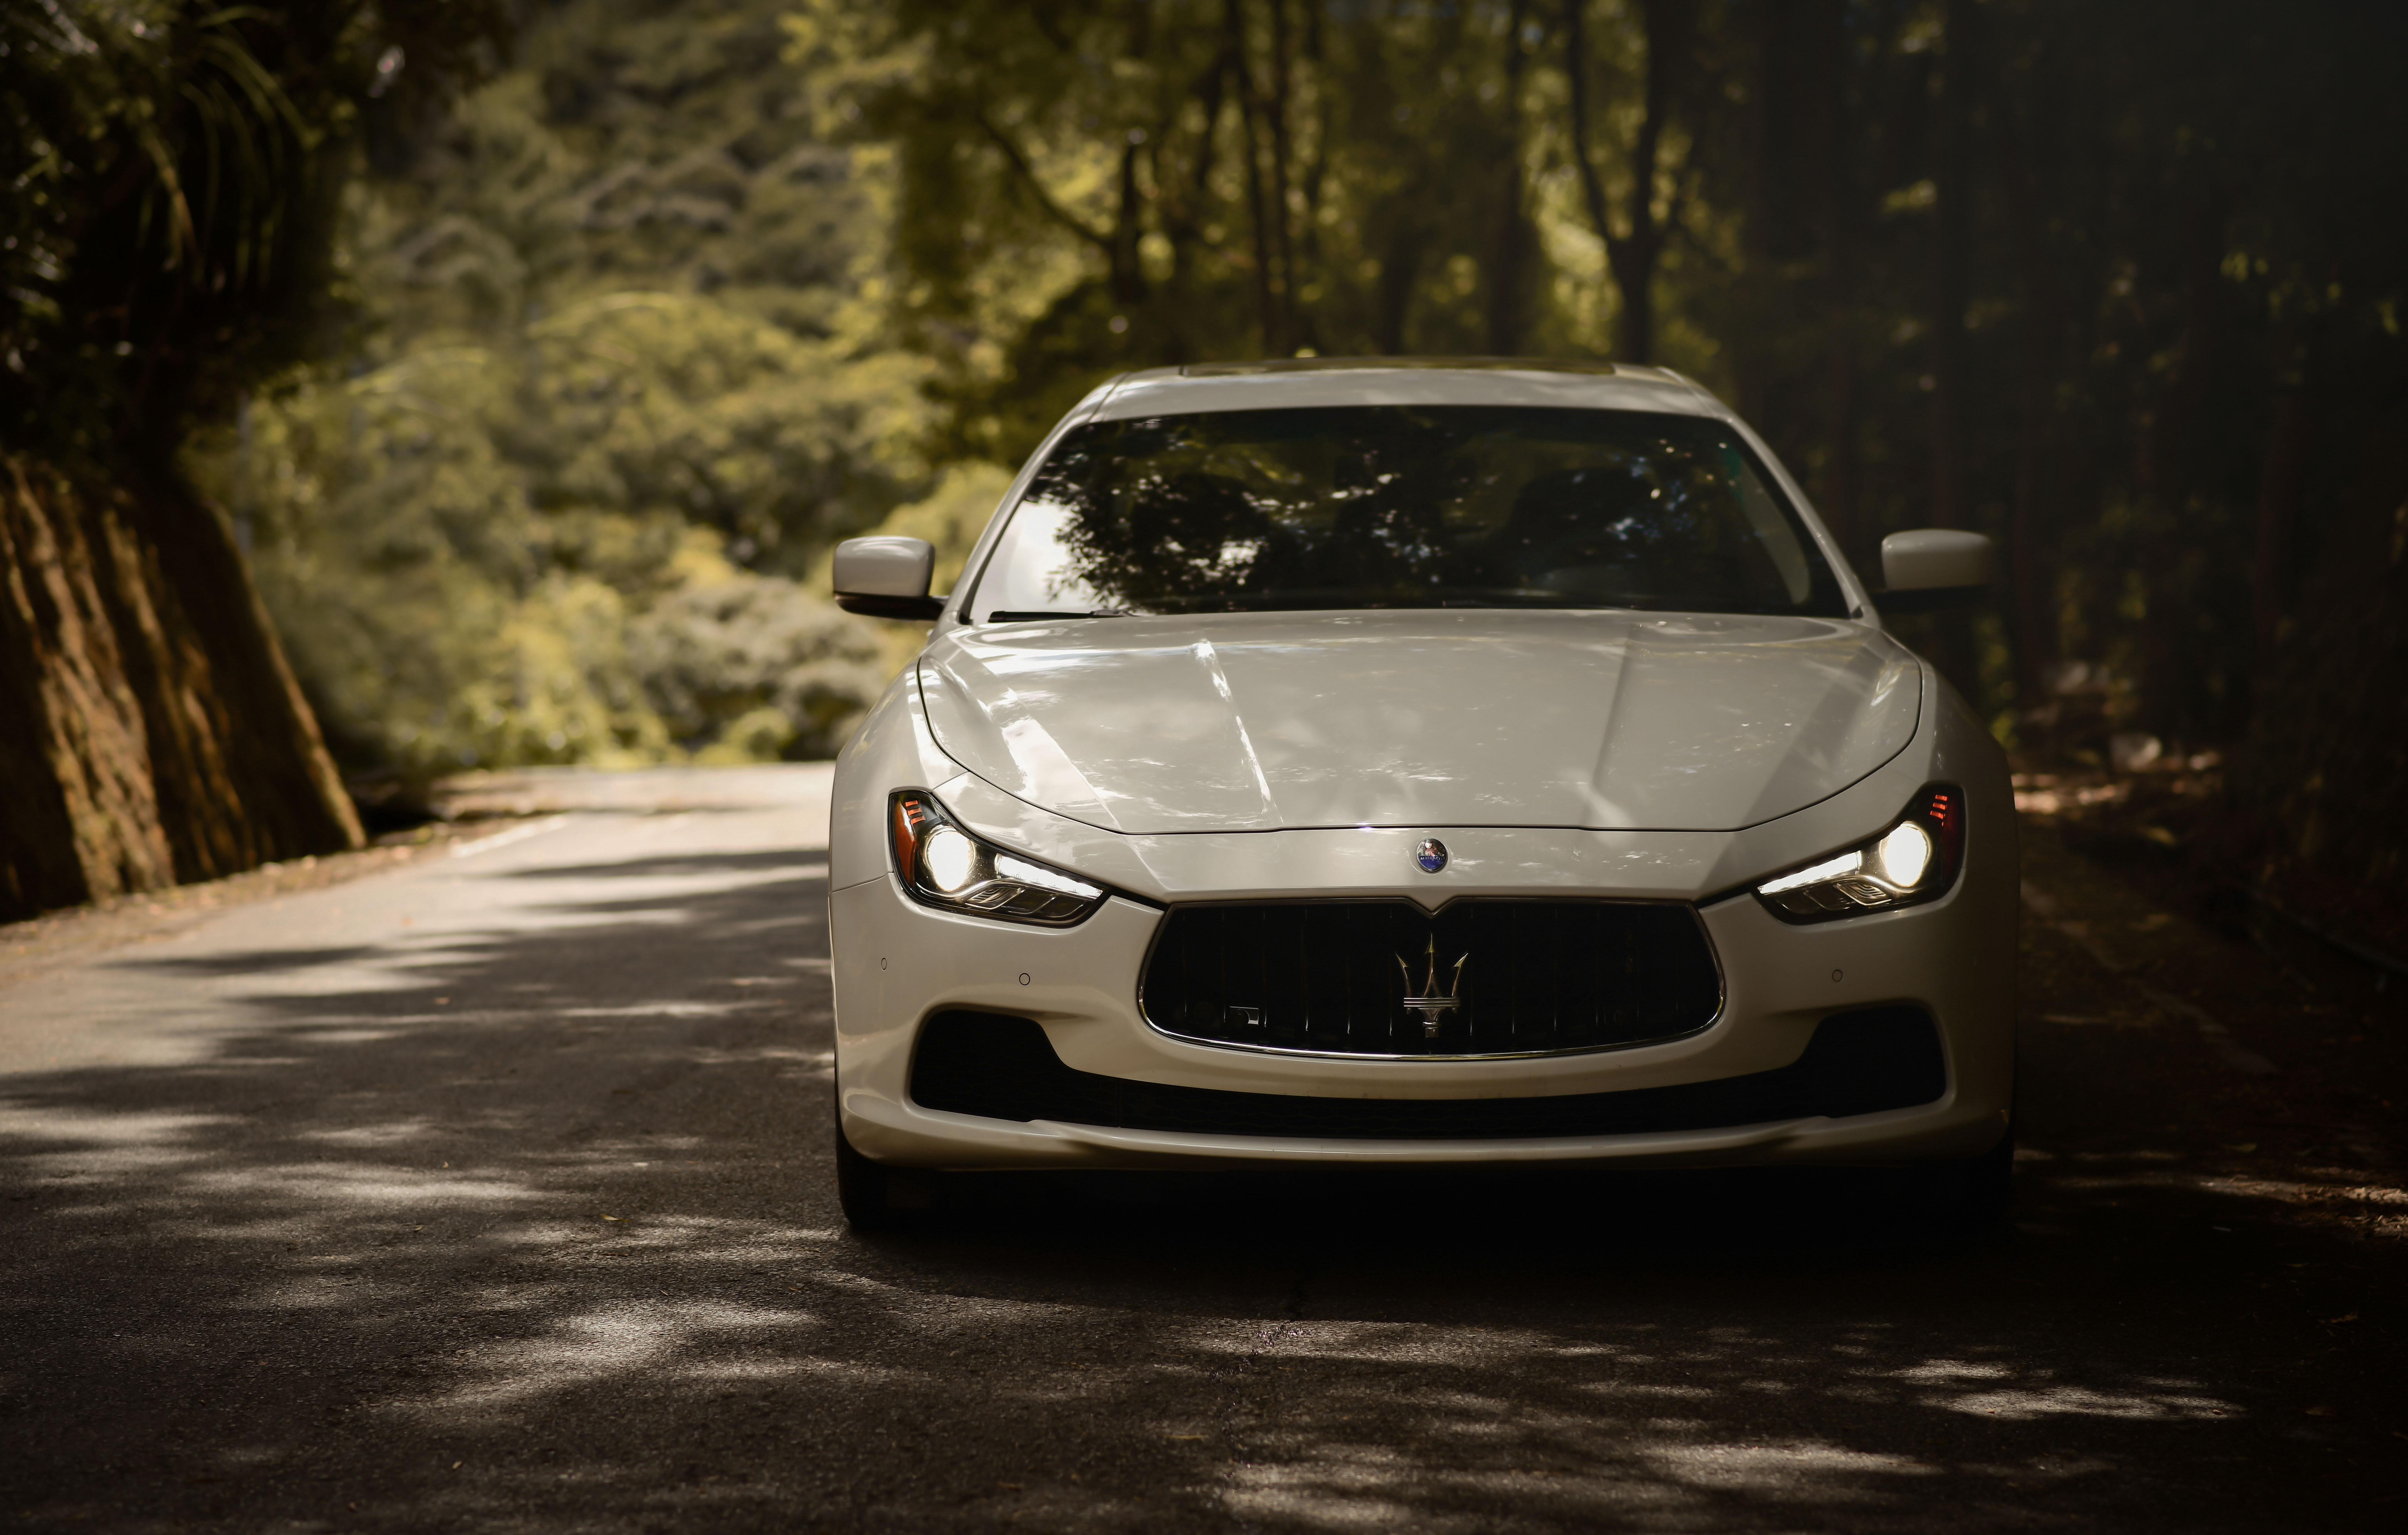 maserati, cars, maserati ghibli, white, road, car, front view, machine wallpapers for tablet